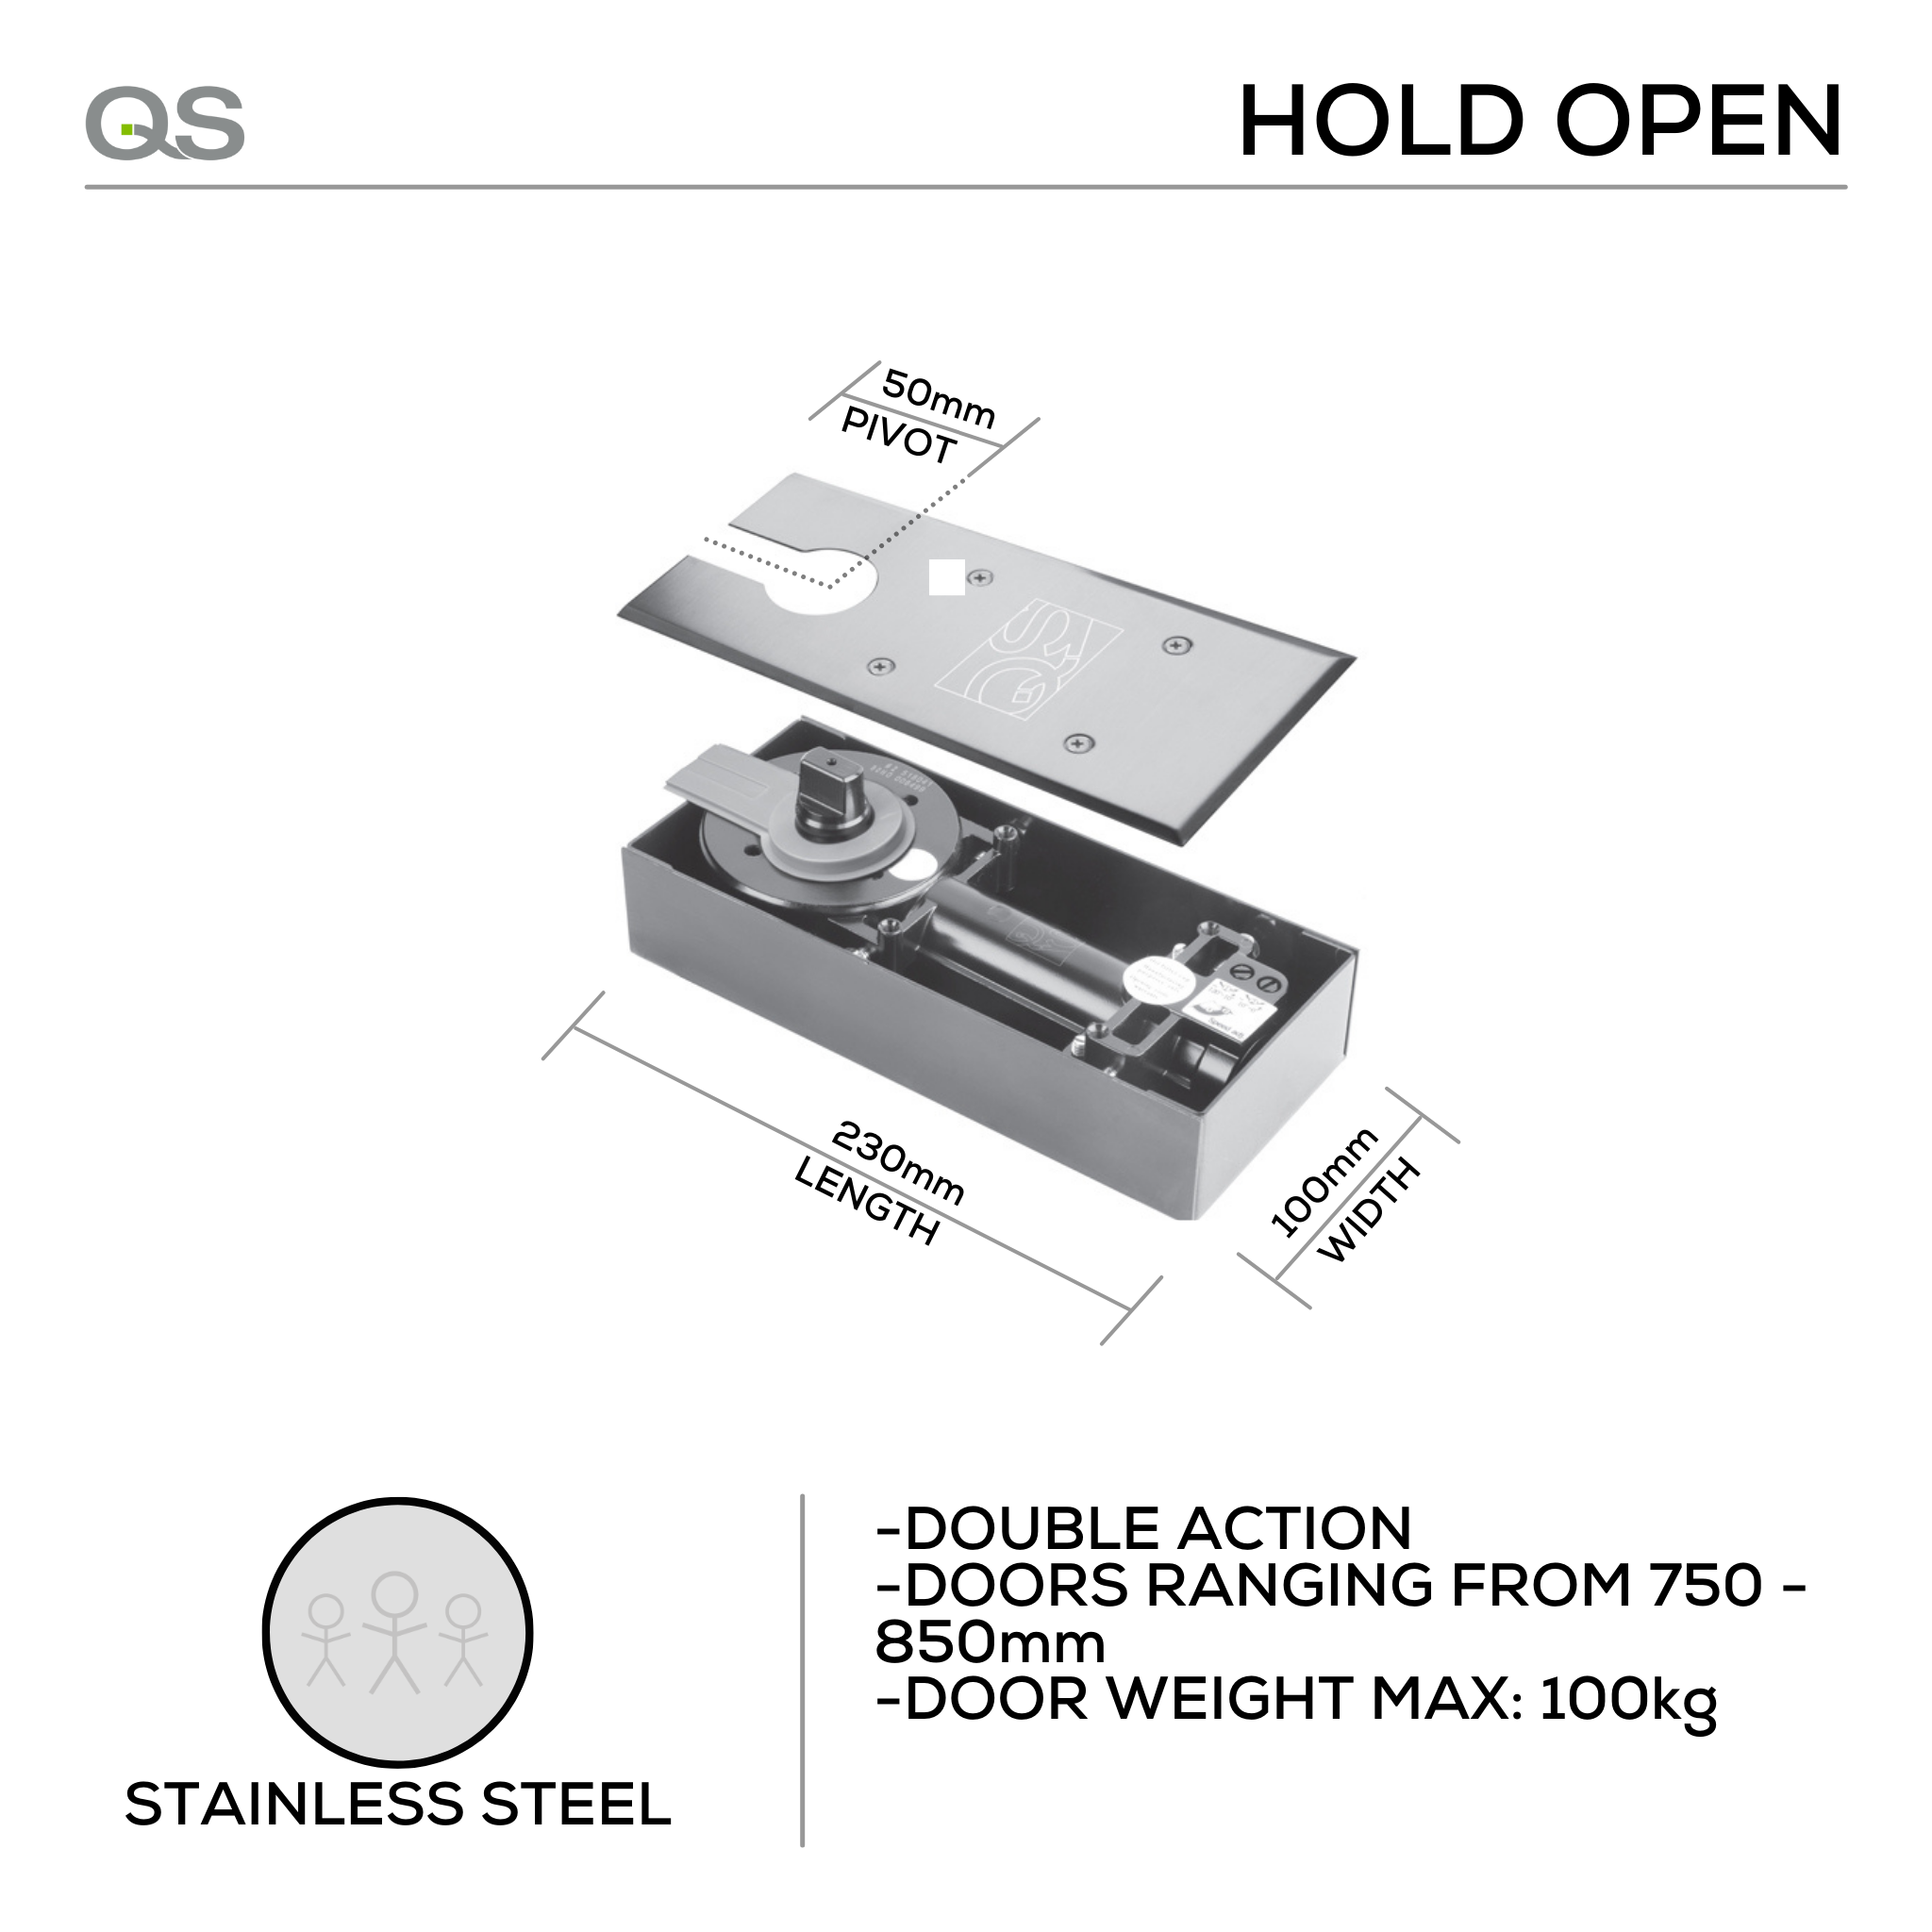 QS860 HO, Floorspring, Double Action, Hold Open, 100mm (kg), Top Centre, Bottom Strap, Stainless Steel, QS